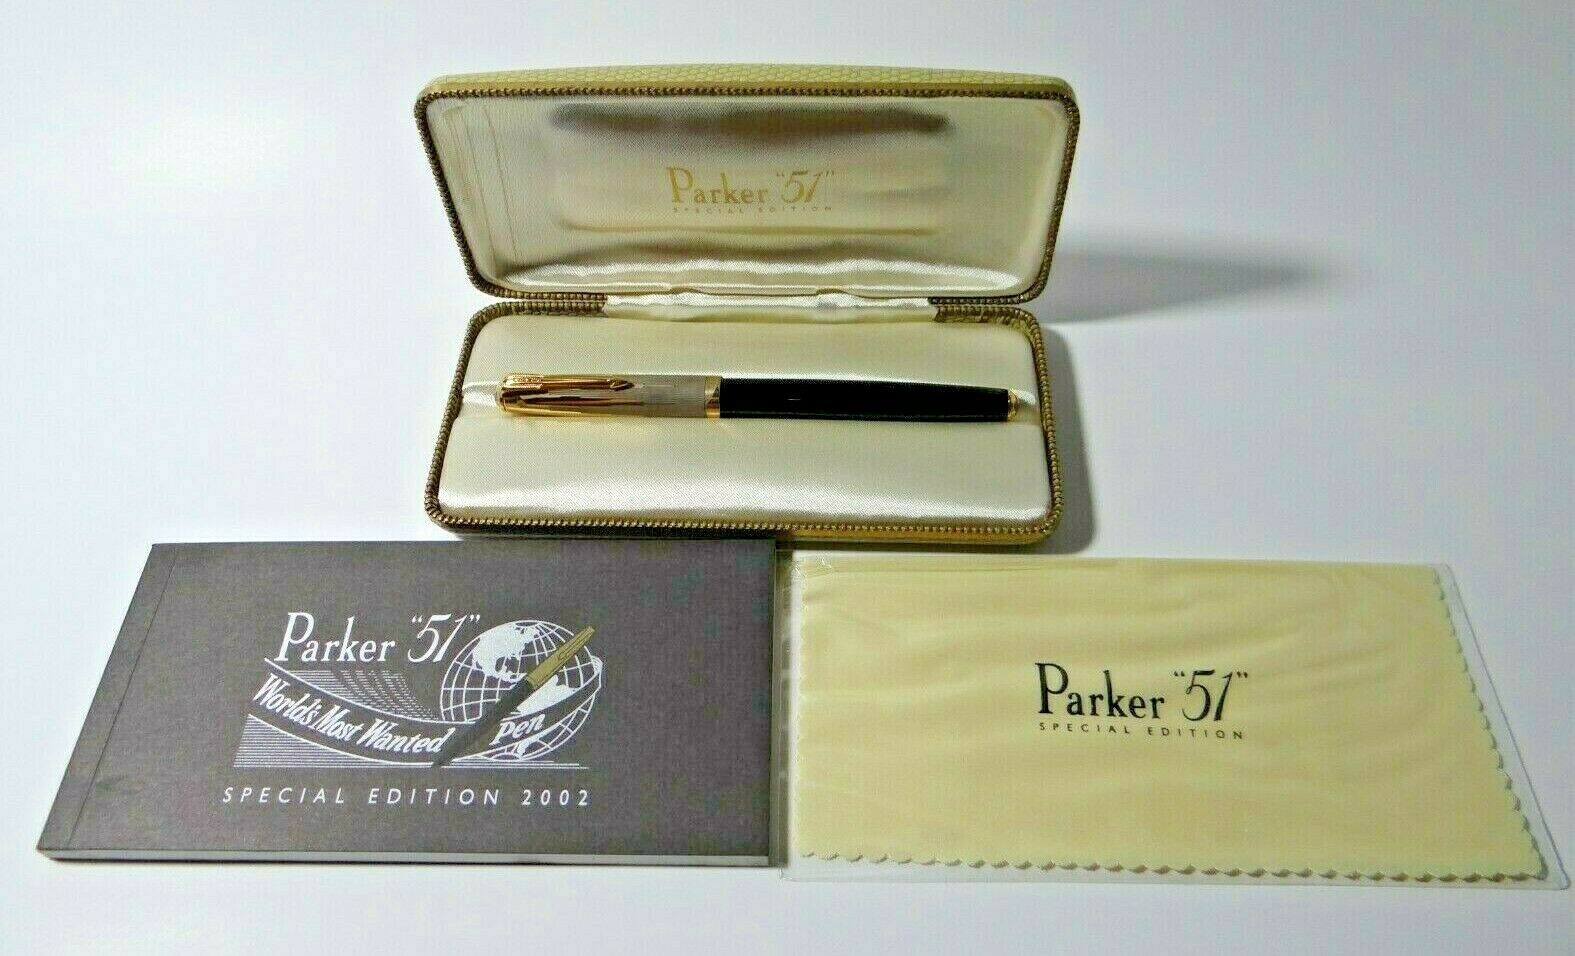 Parker "51" Special Edition Fountain Pen With Case, Cloth And Booklet. As Is.